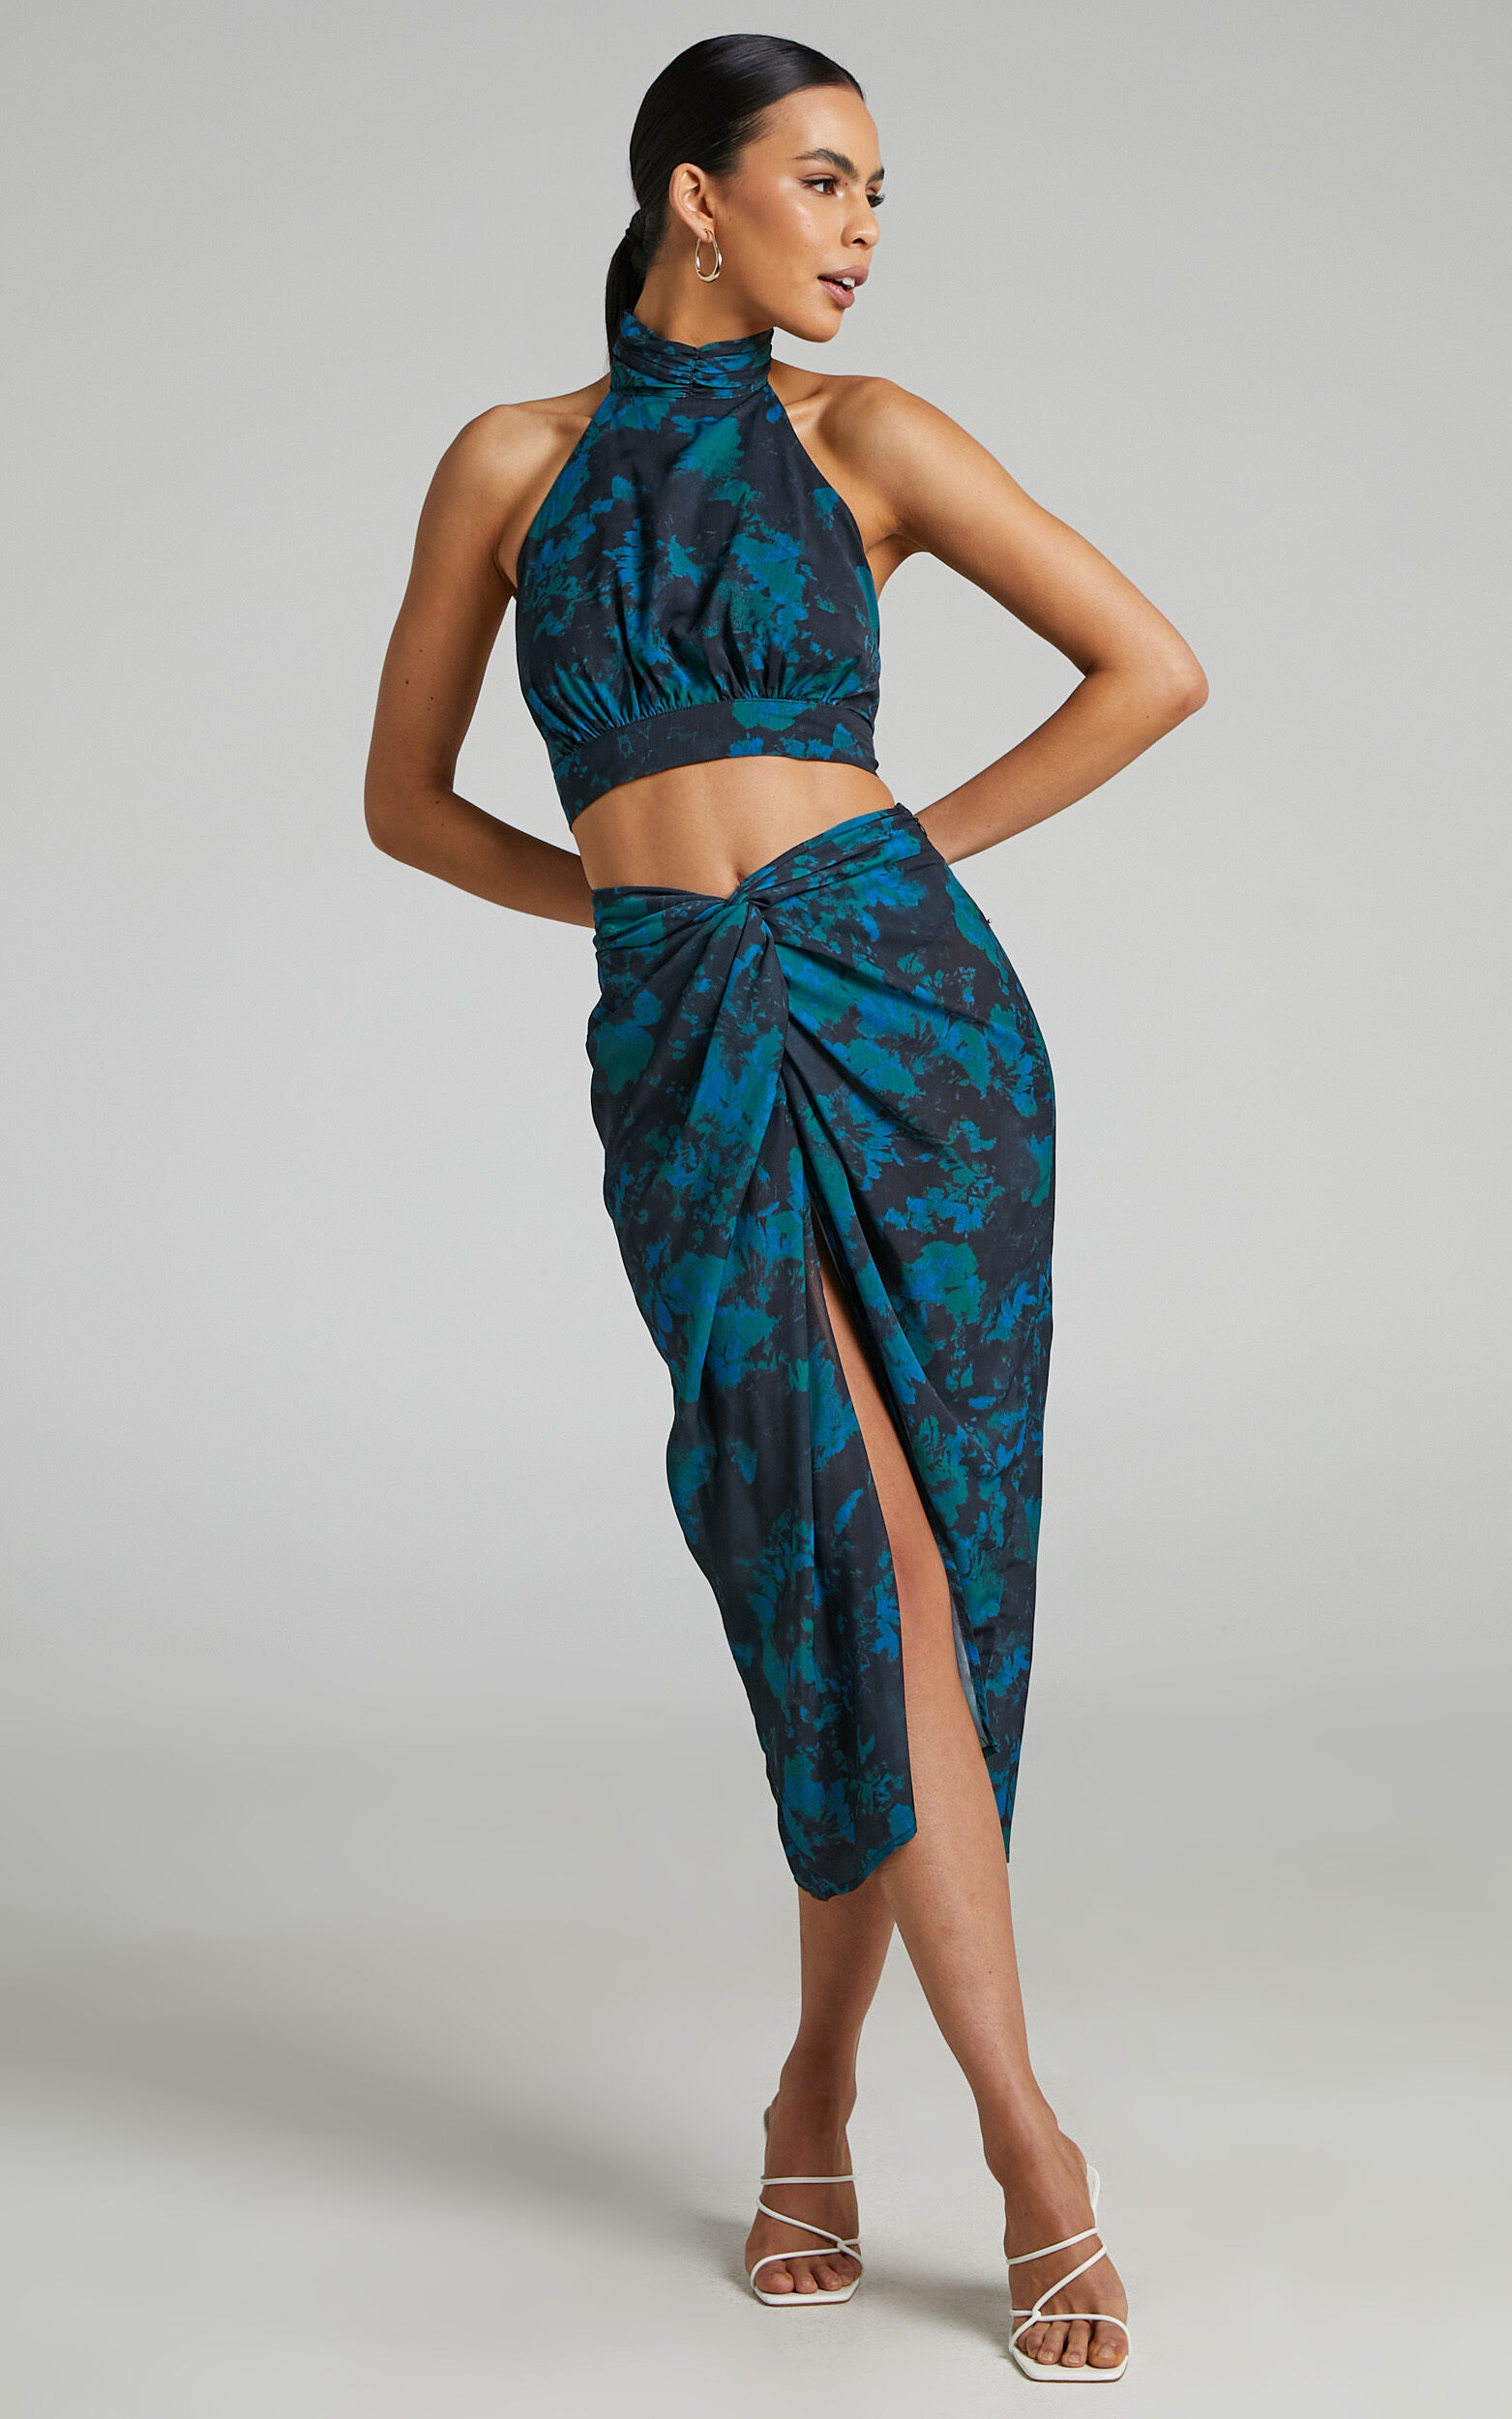 Mirski High Neck Halter Top and Twist Front Midi Skirt Two Piece Set in Jewel Blur - 04, GRN1, super-hi-res image number null